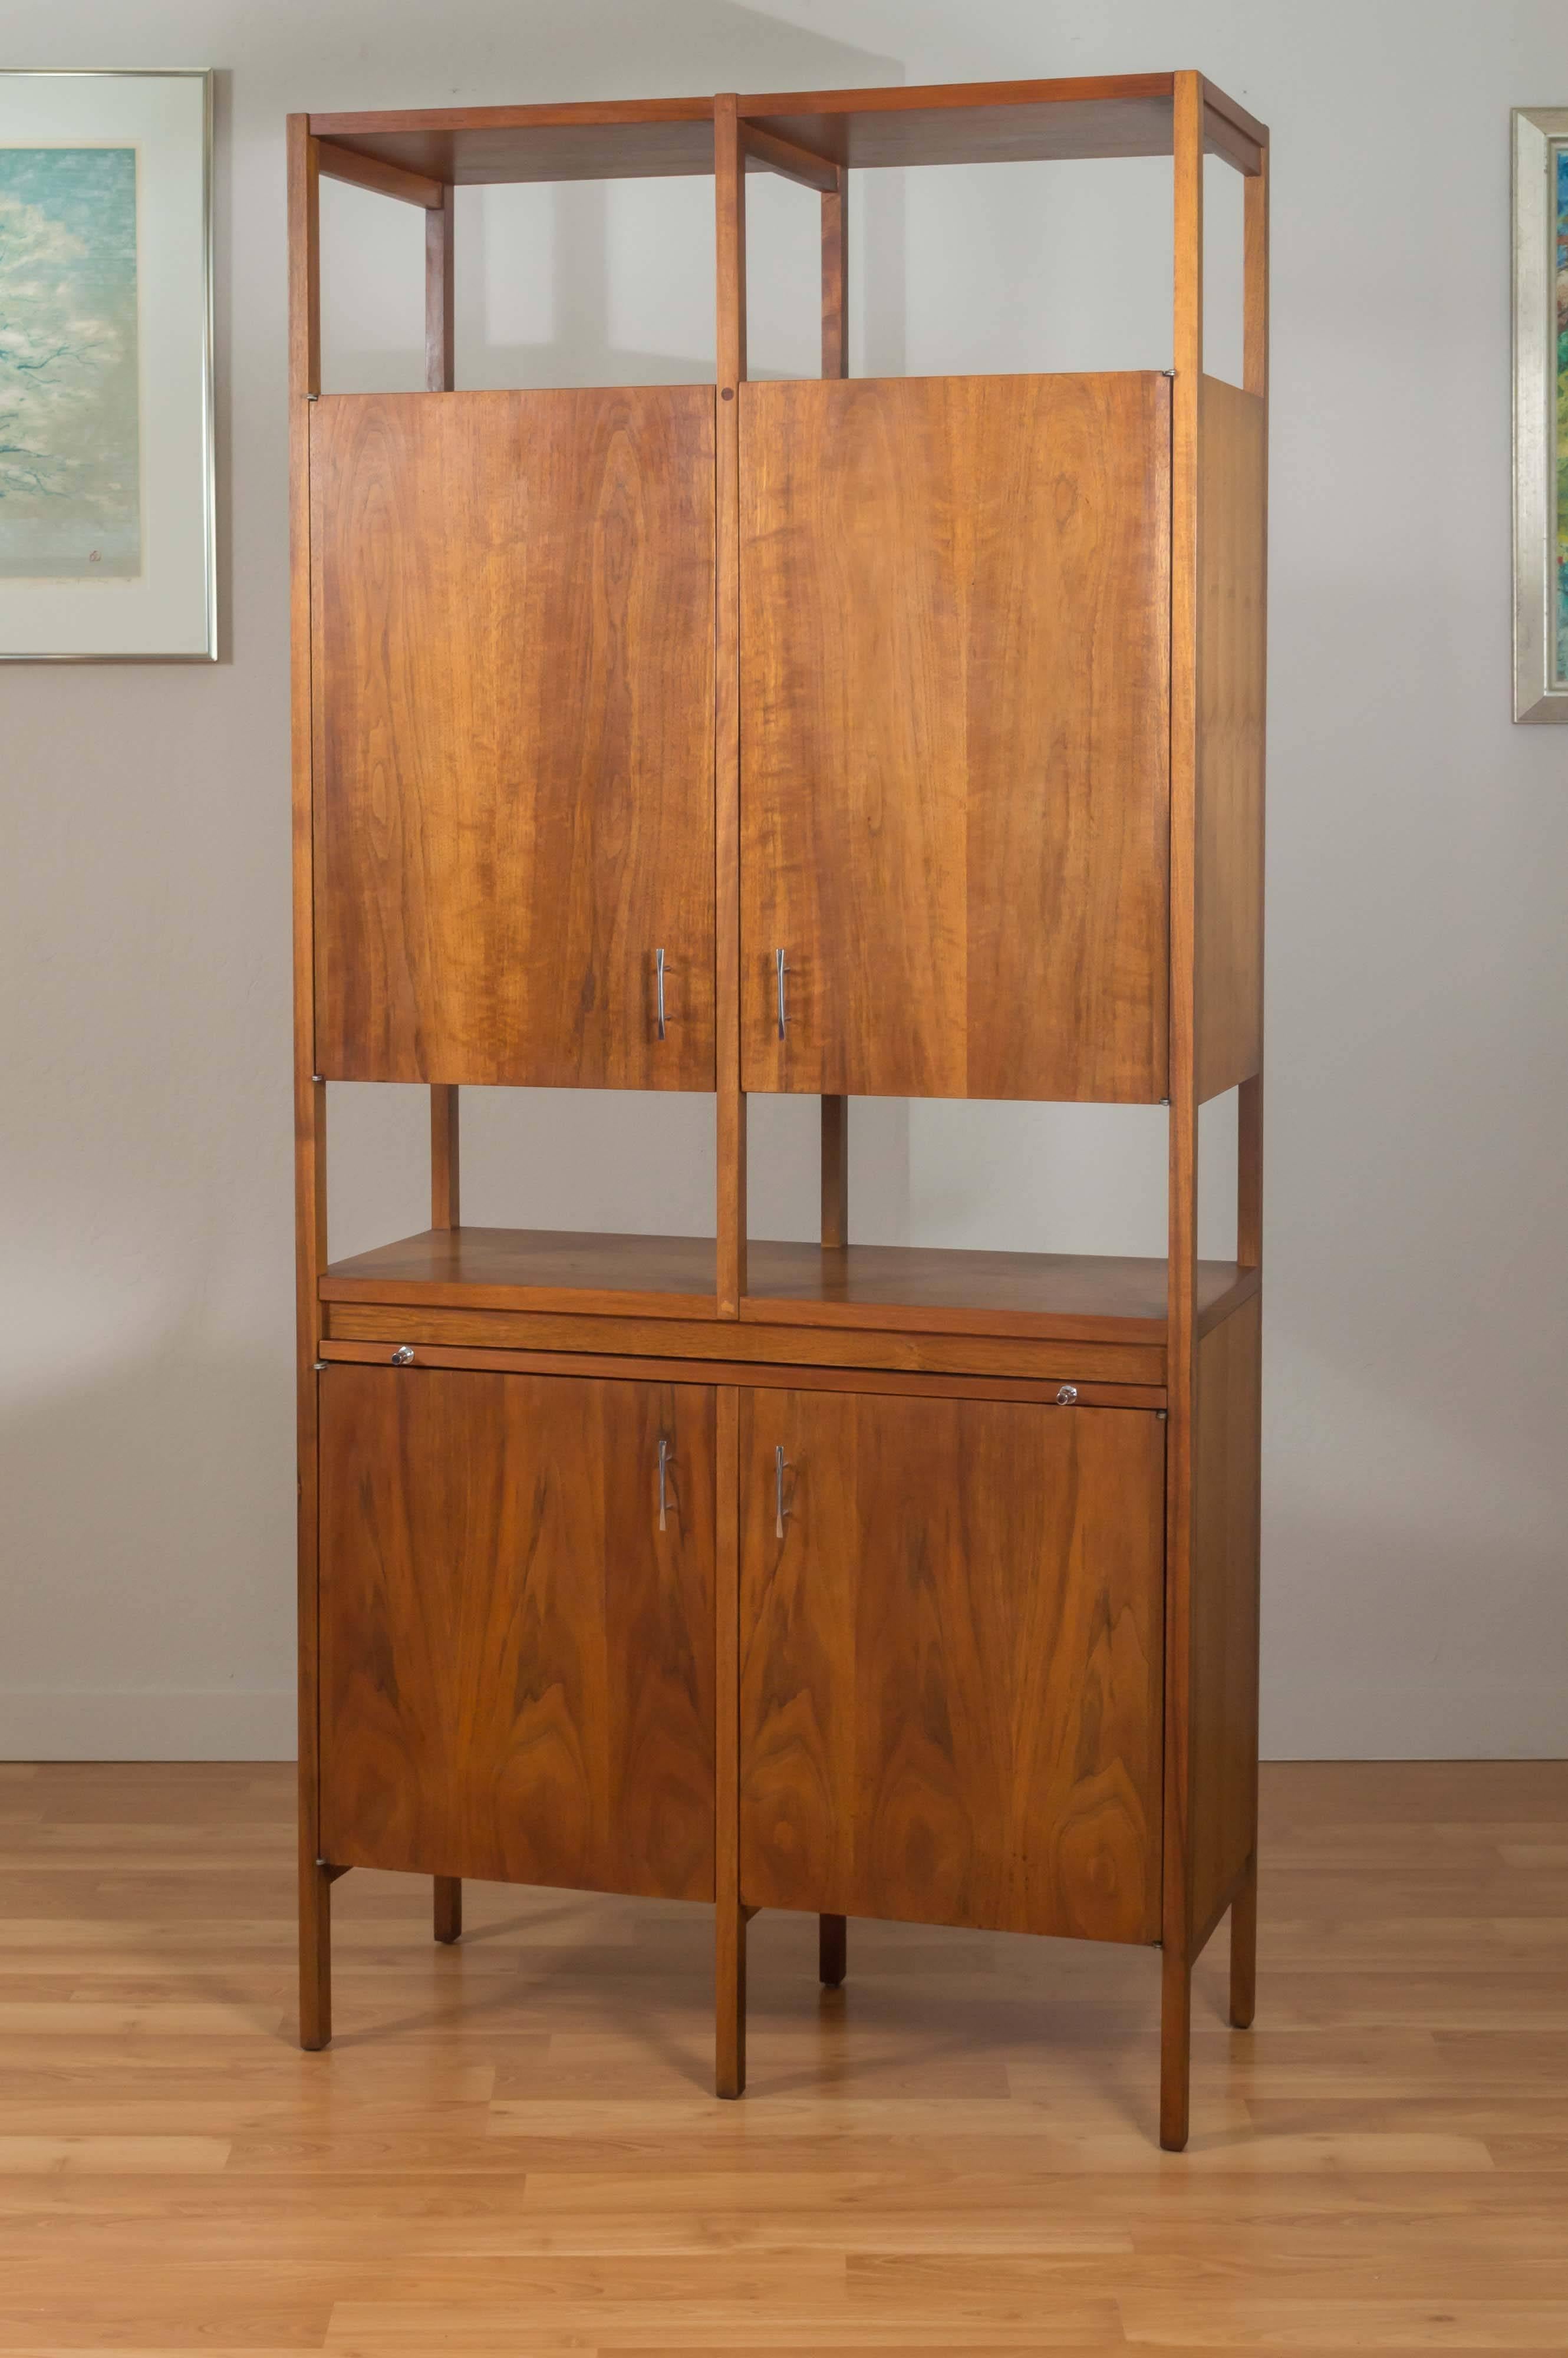 Towering and rare four-door dry bar or tall cabinet by Paul McCobb for Lane’s “Delineator” series. Walnut, with immaculate pull-out black laminate serving surface and original polished metal pulls. Each upper cabinet contains a large storage